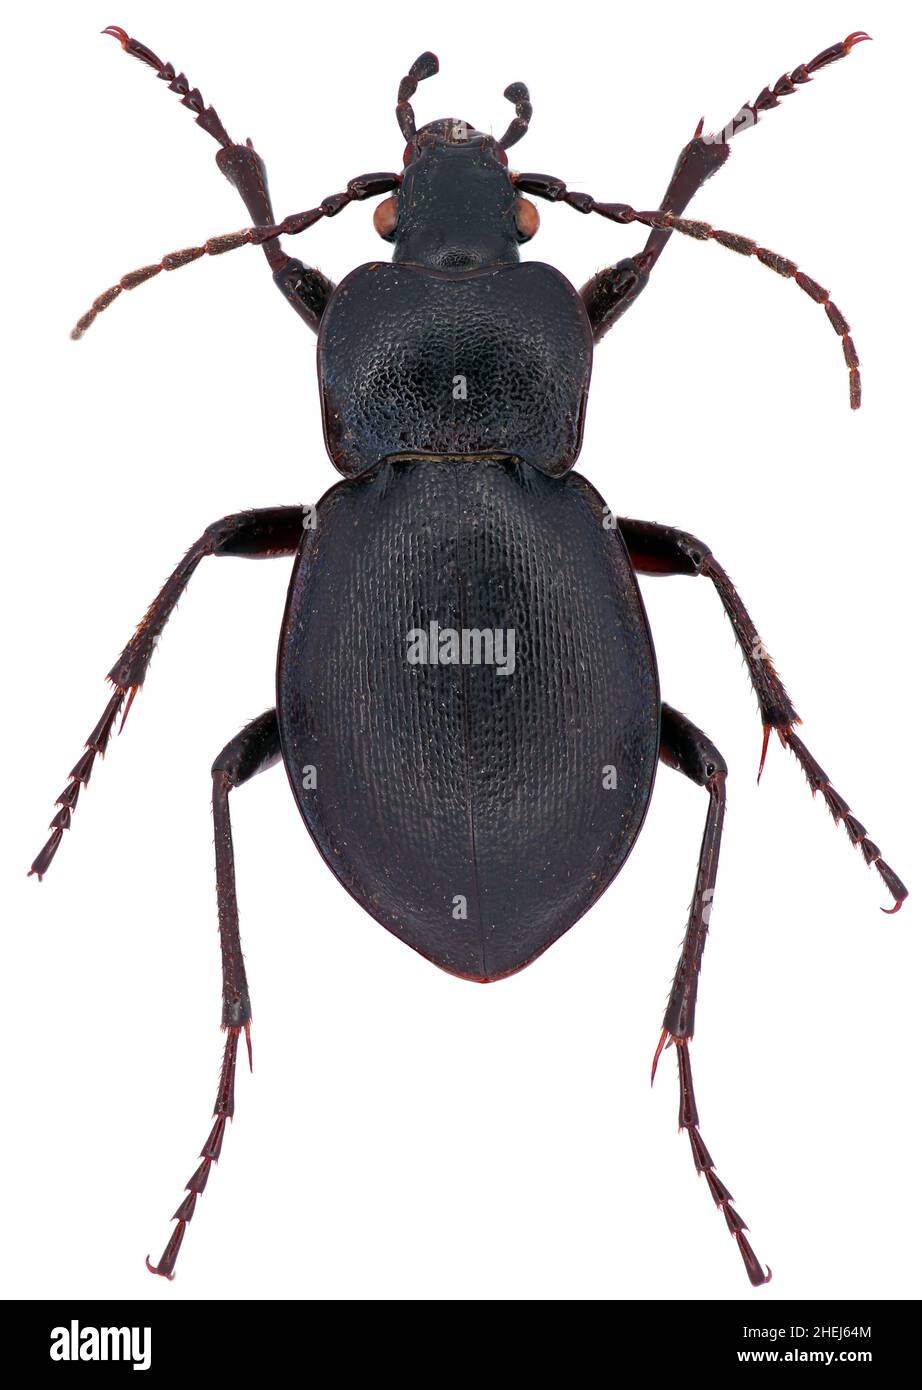 Carabus convexus is a member of a ground beetle family Carabidae on a white background Stock Photo